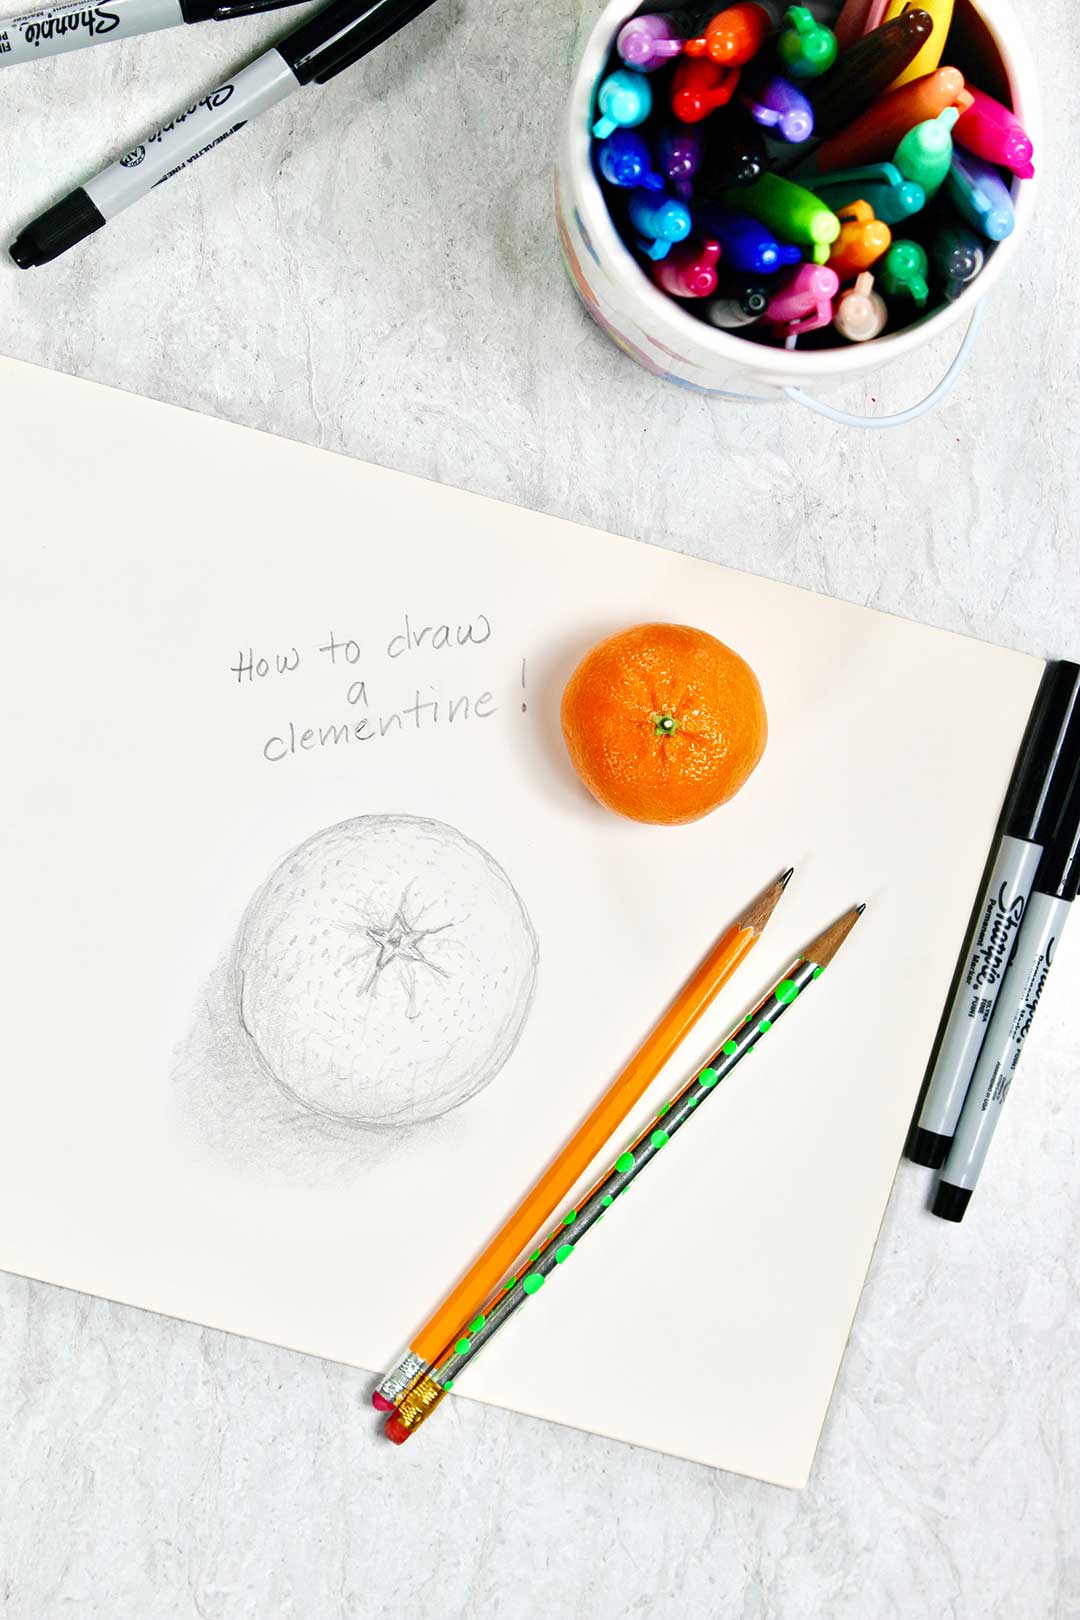 https://welcometonanas.com/wp-content/uploads/2022/06/Welcome-to-Nanas-How-to-Draw-an-Orange-or-Clementine-2.jpg